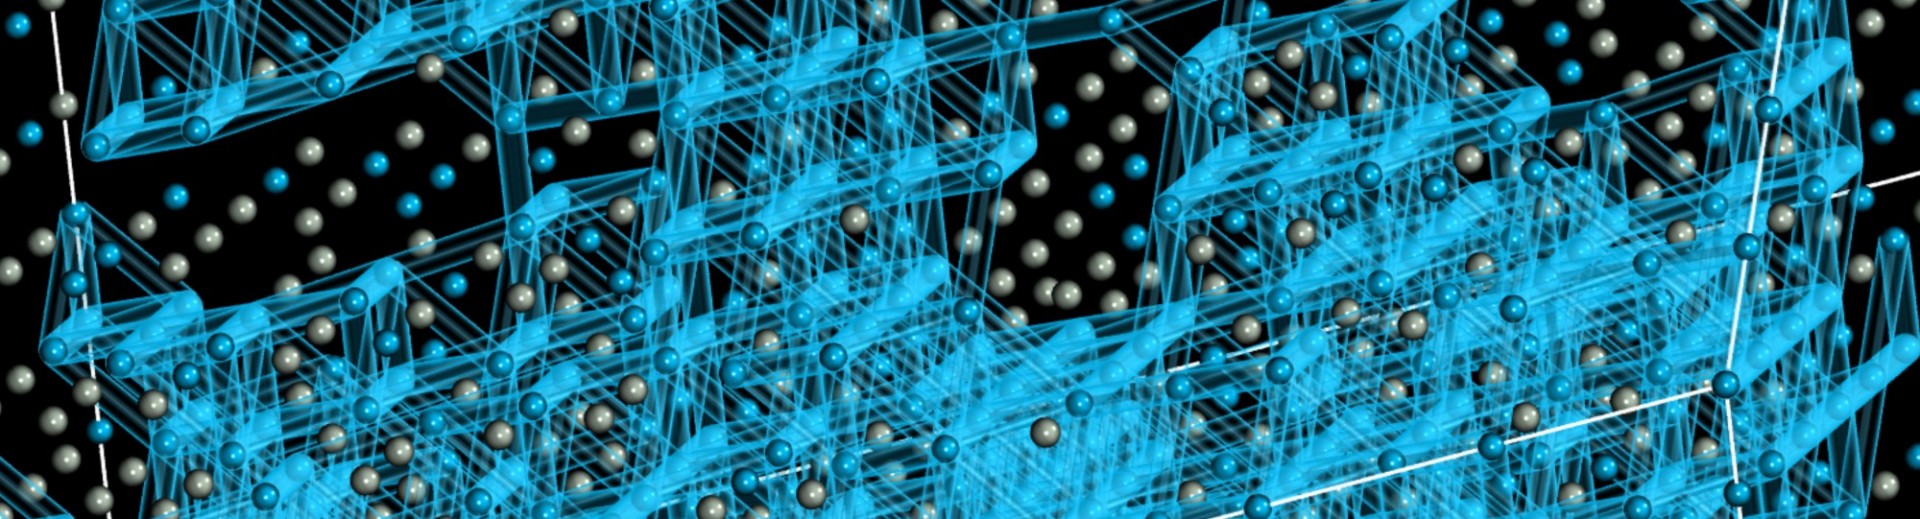 Image of a percolating network of ionic diffusion pathways